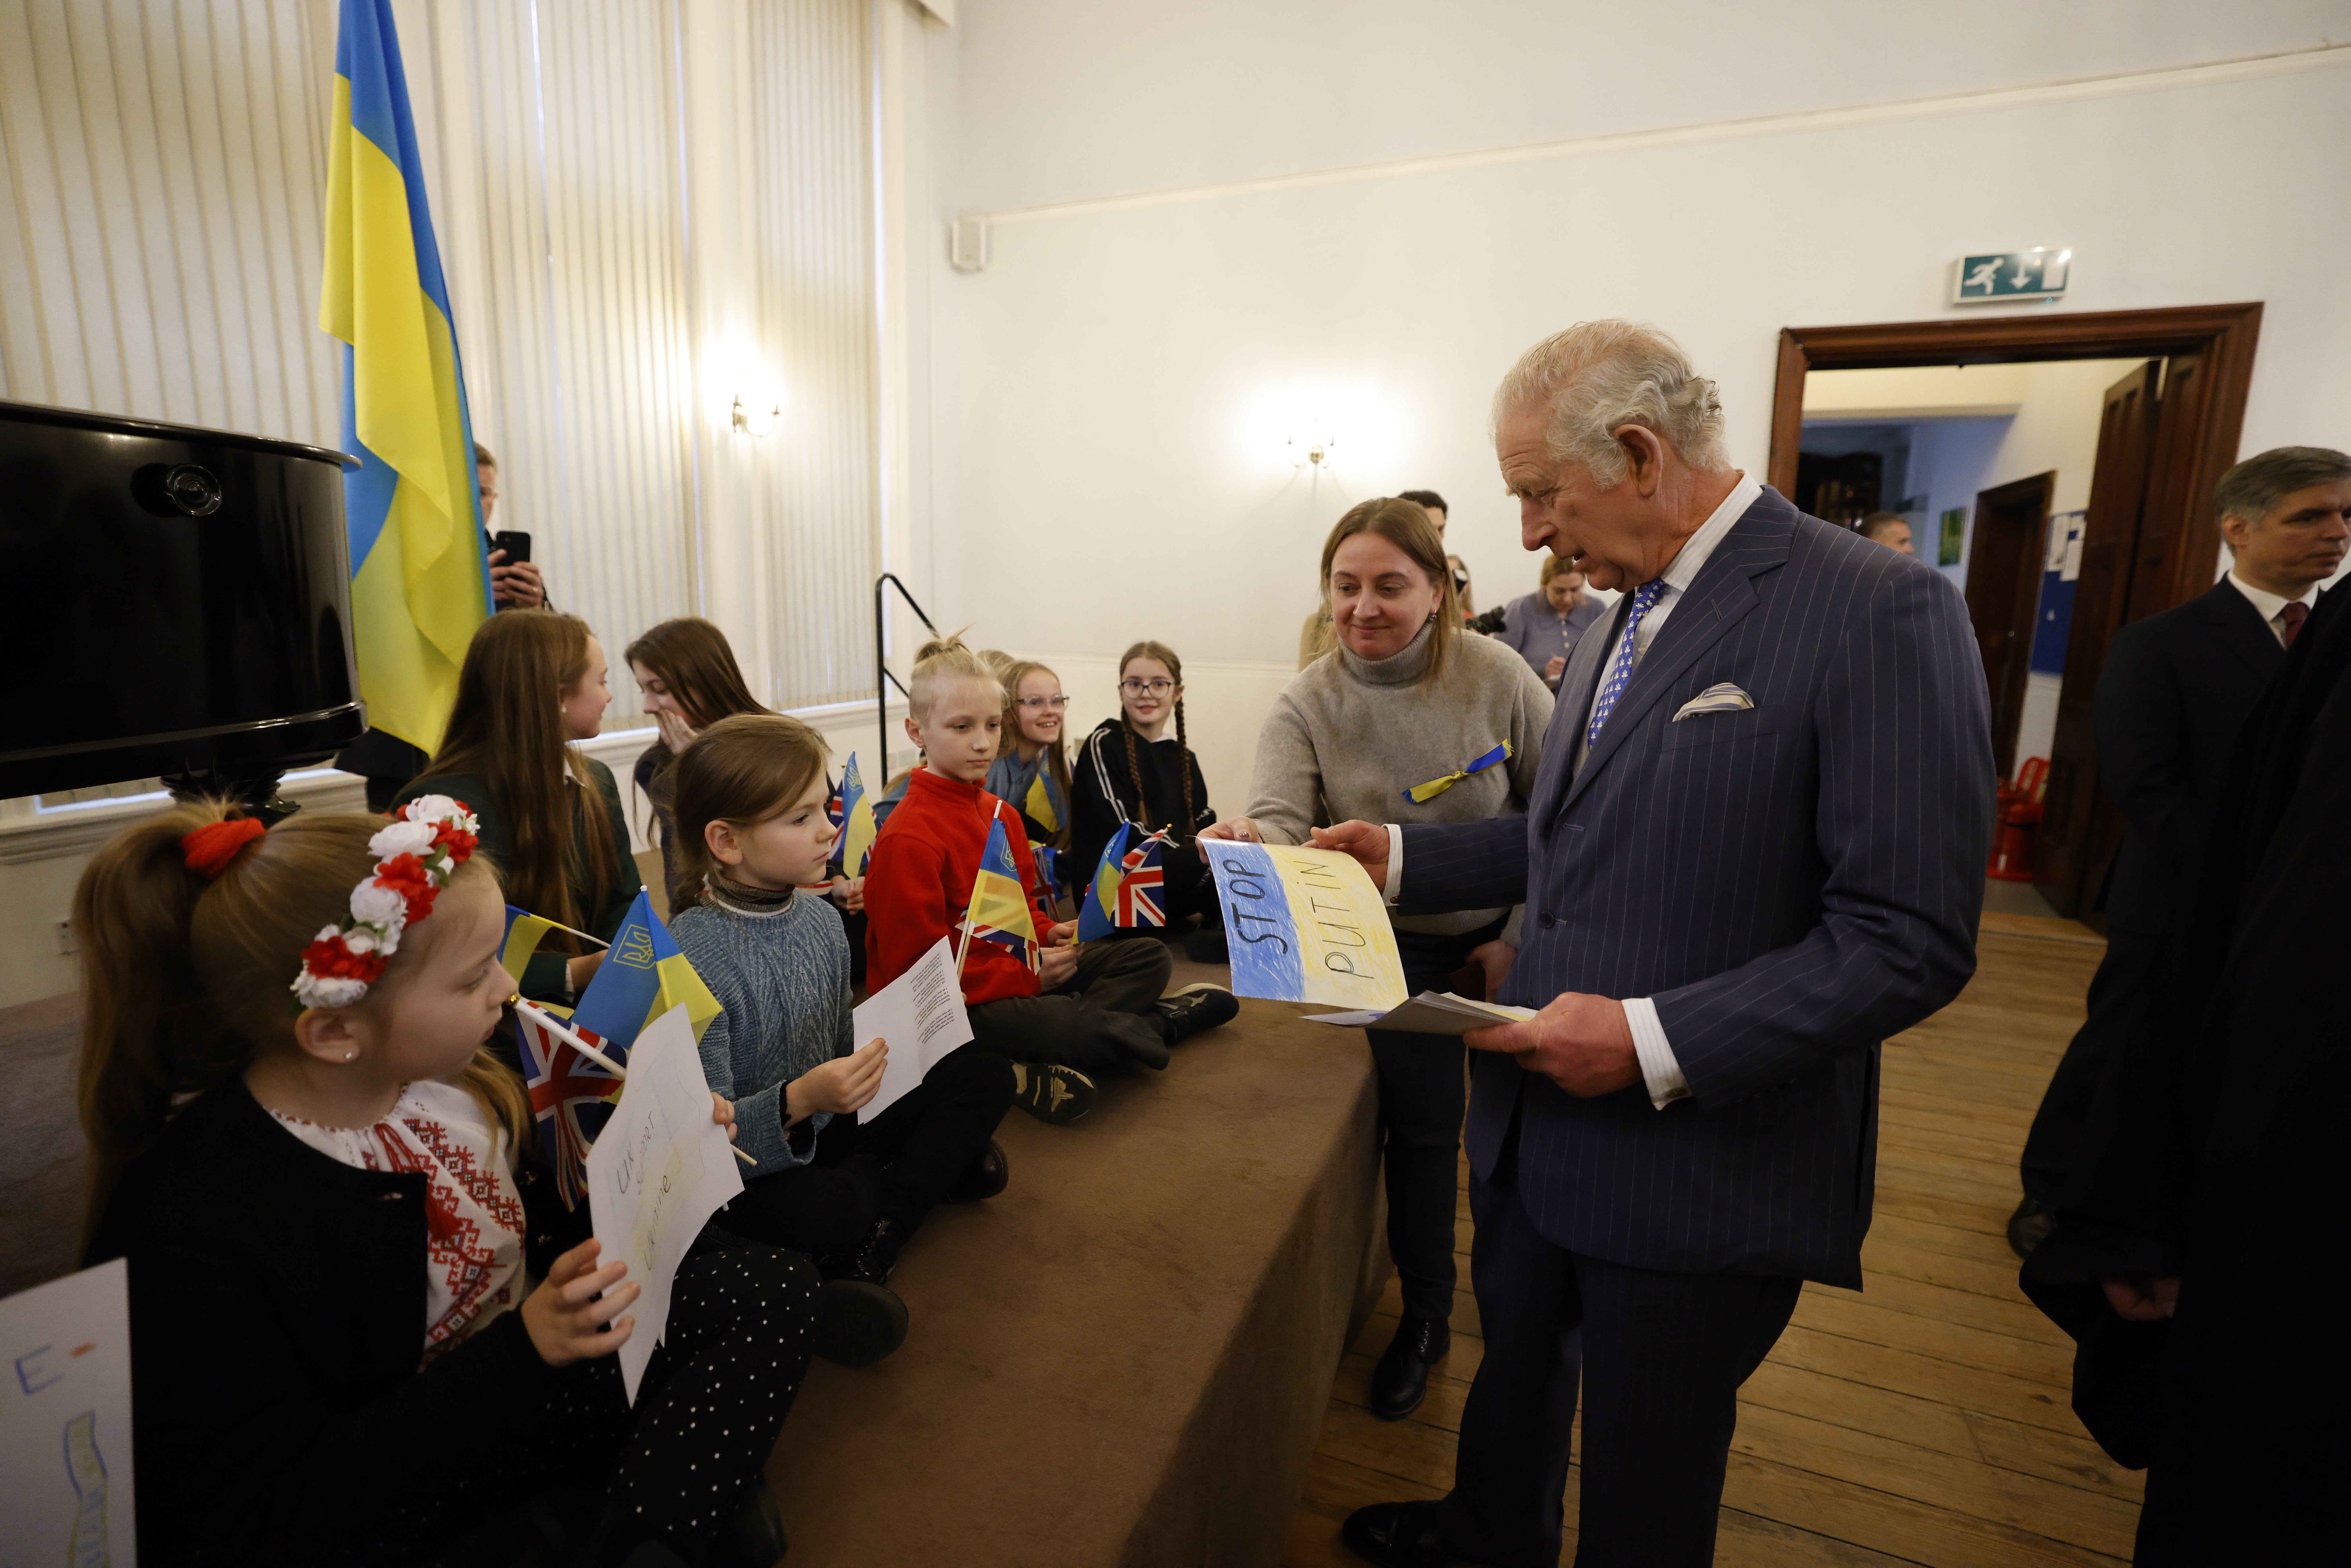 Prince Charles accepts a poster from schoolchildren at the Ukrainian Catholic Cathedral during his visit on Wednesday